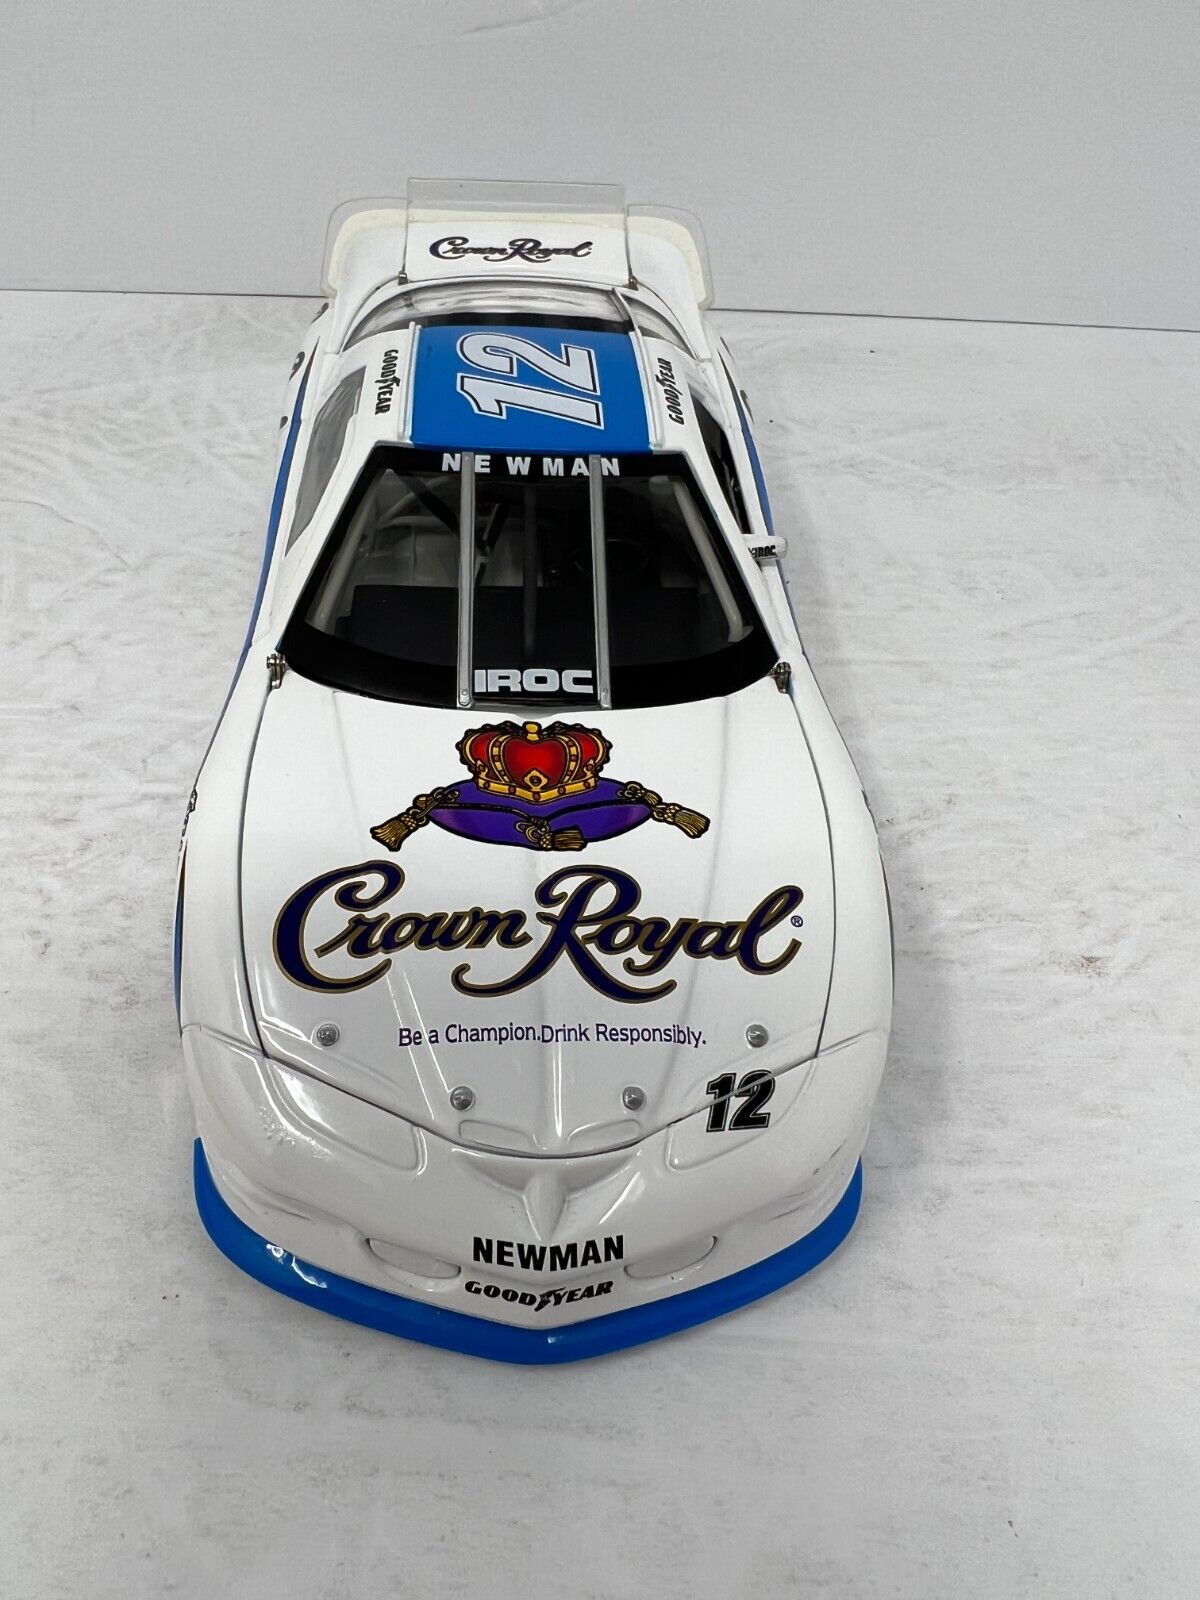 Action Nascar #12 Ryan Newman Crown Royal 2004 IROC Xtreme 1 of 204 1:24 Diecast